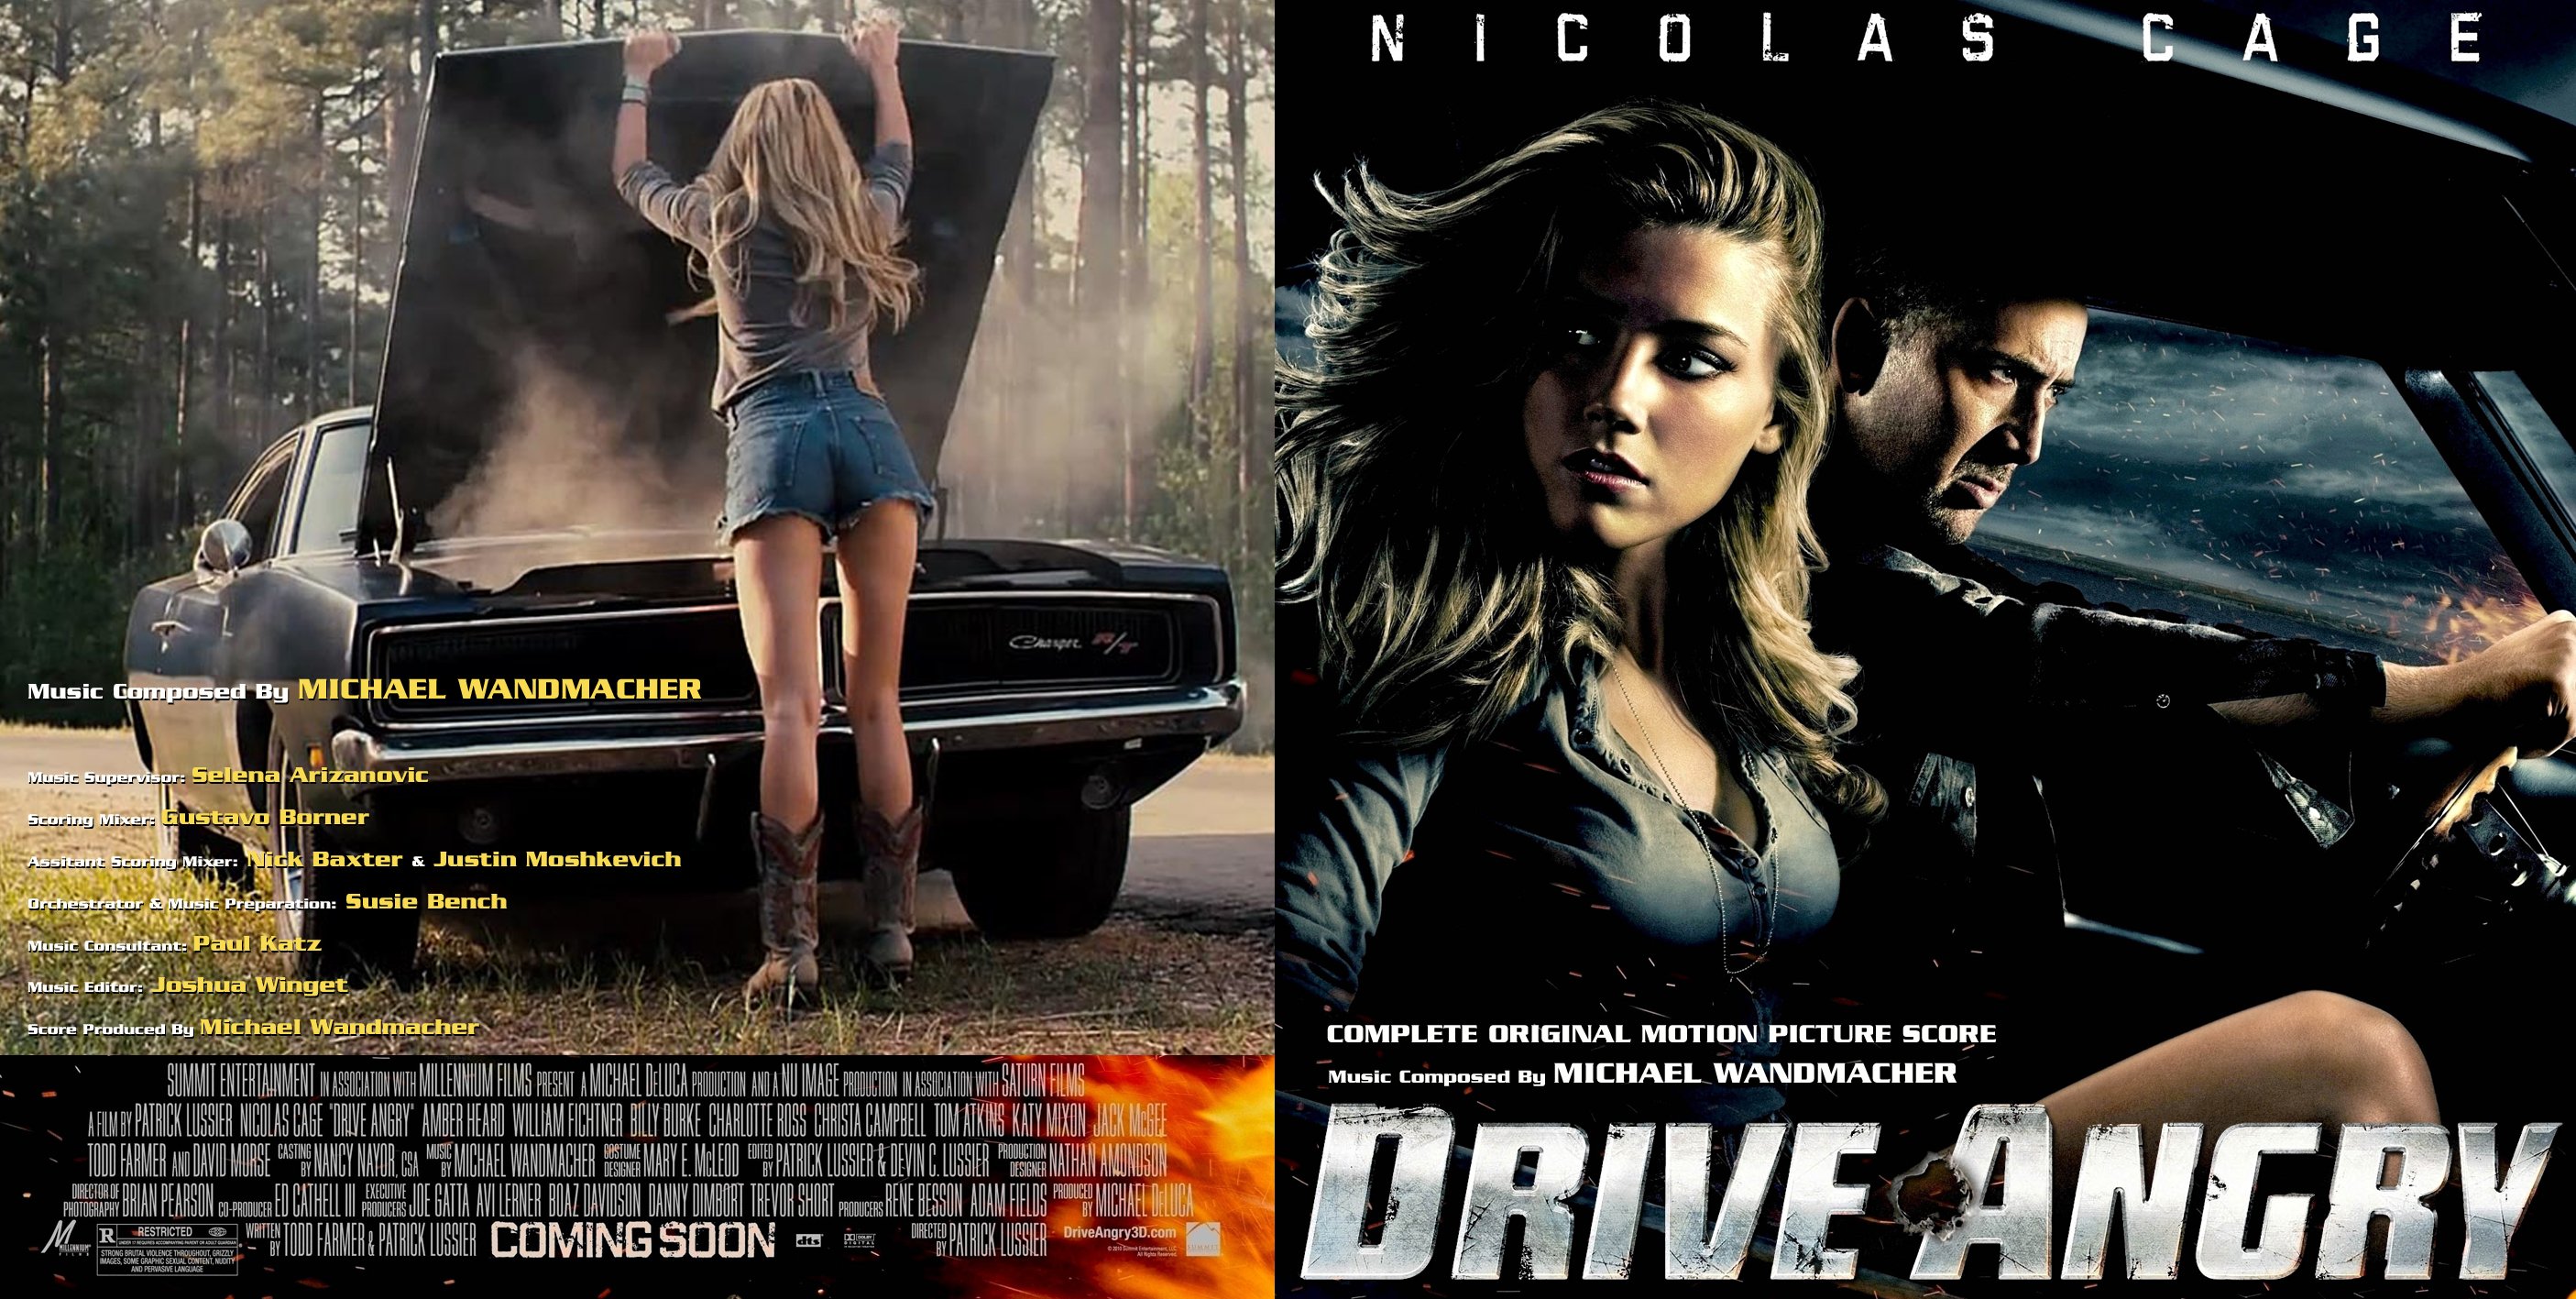 drive angry movie images